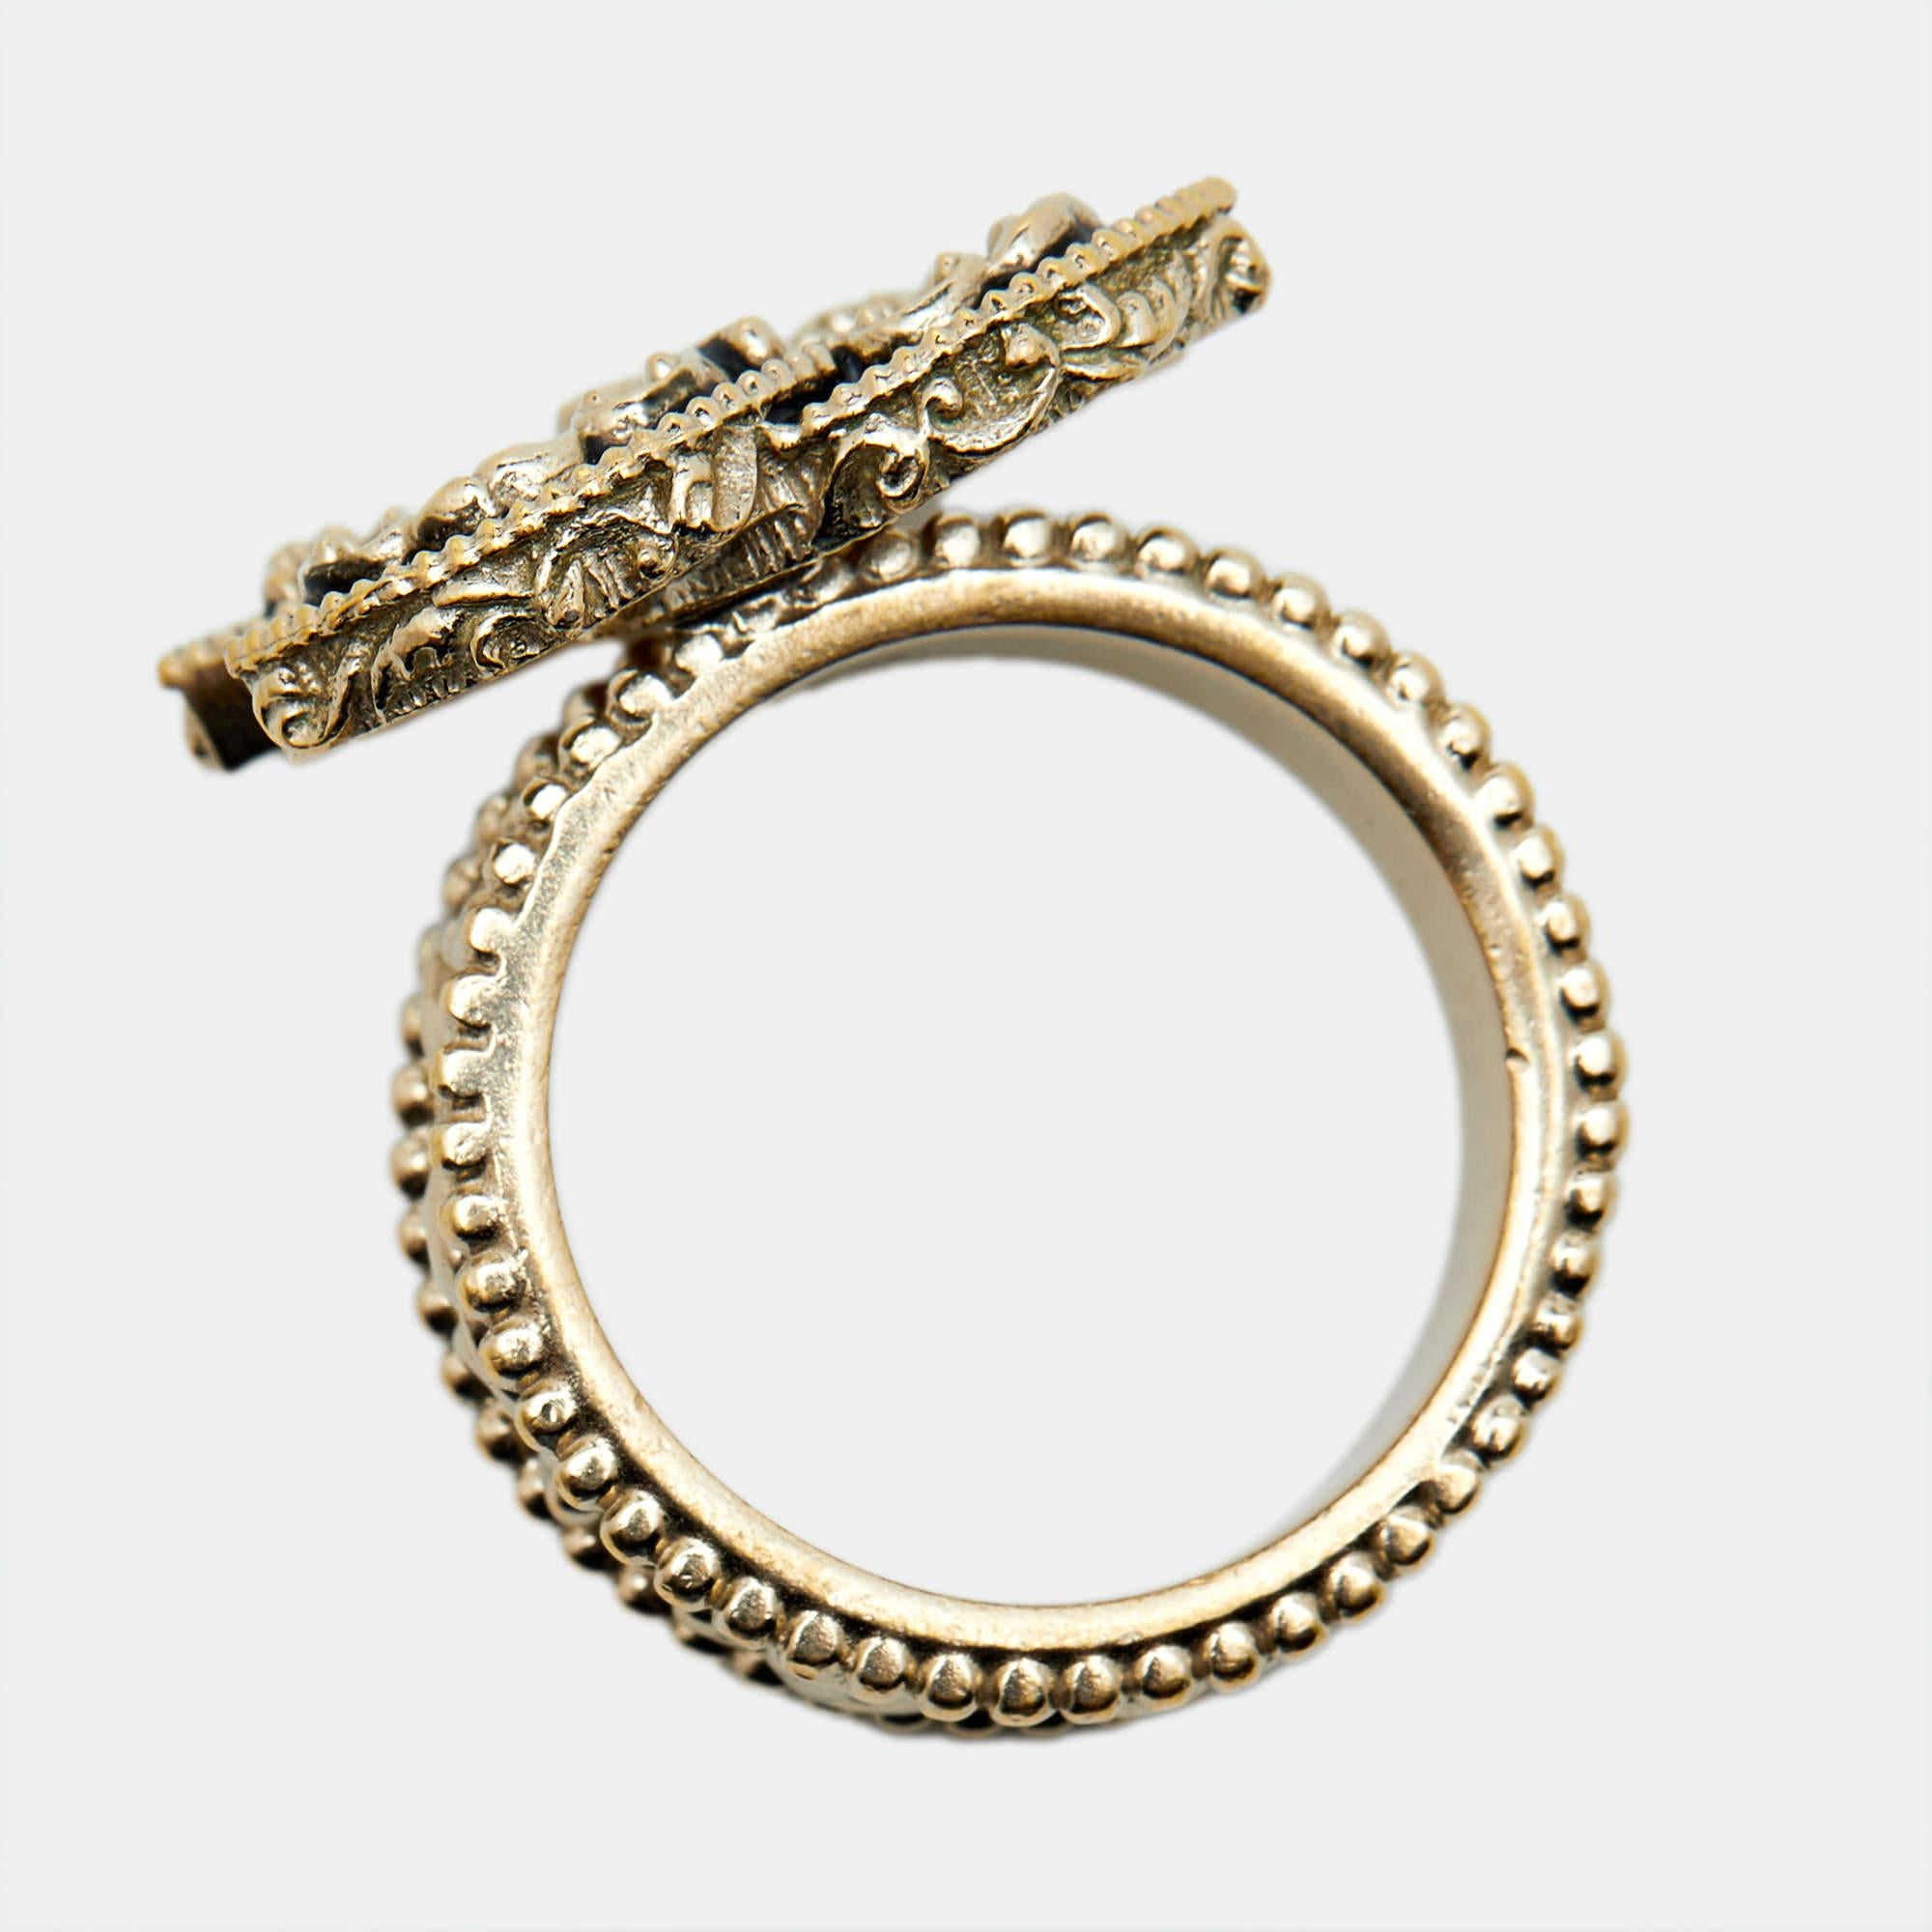 This cocktail ring by Chanel is crafted from gold-tone metal and features exquisite textures. The iconic CC logo rests at the heart of this beautiful design. The ring is complete with hallmark engravings on the inside of the band.

